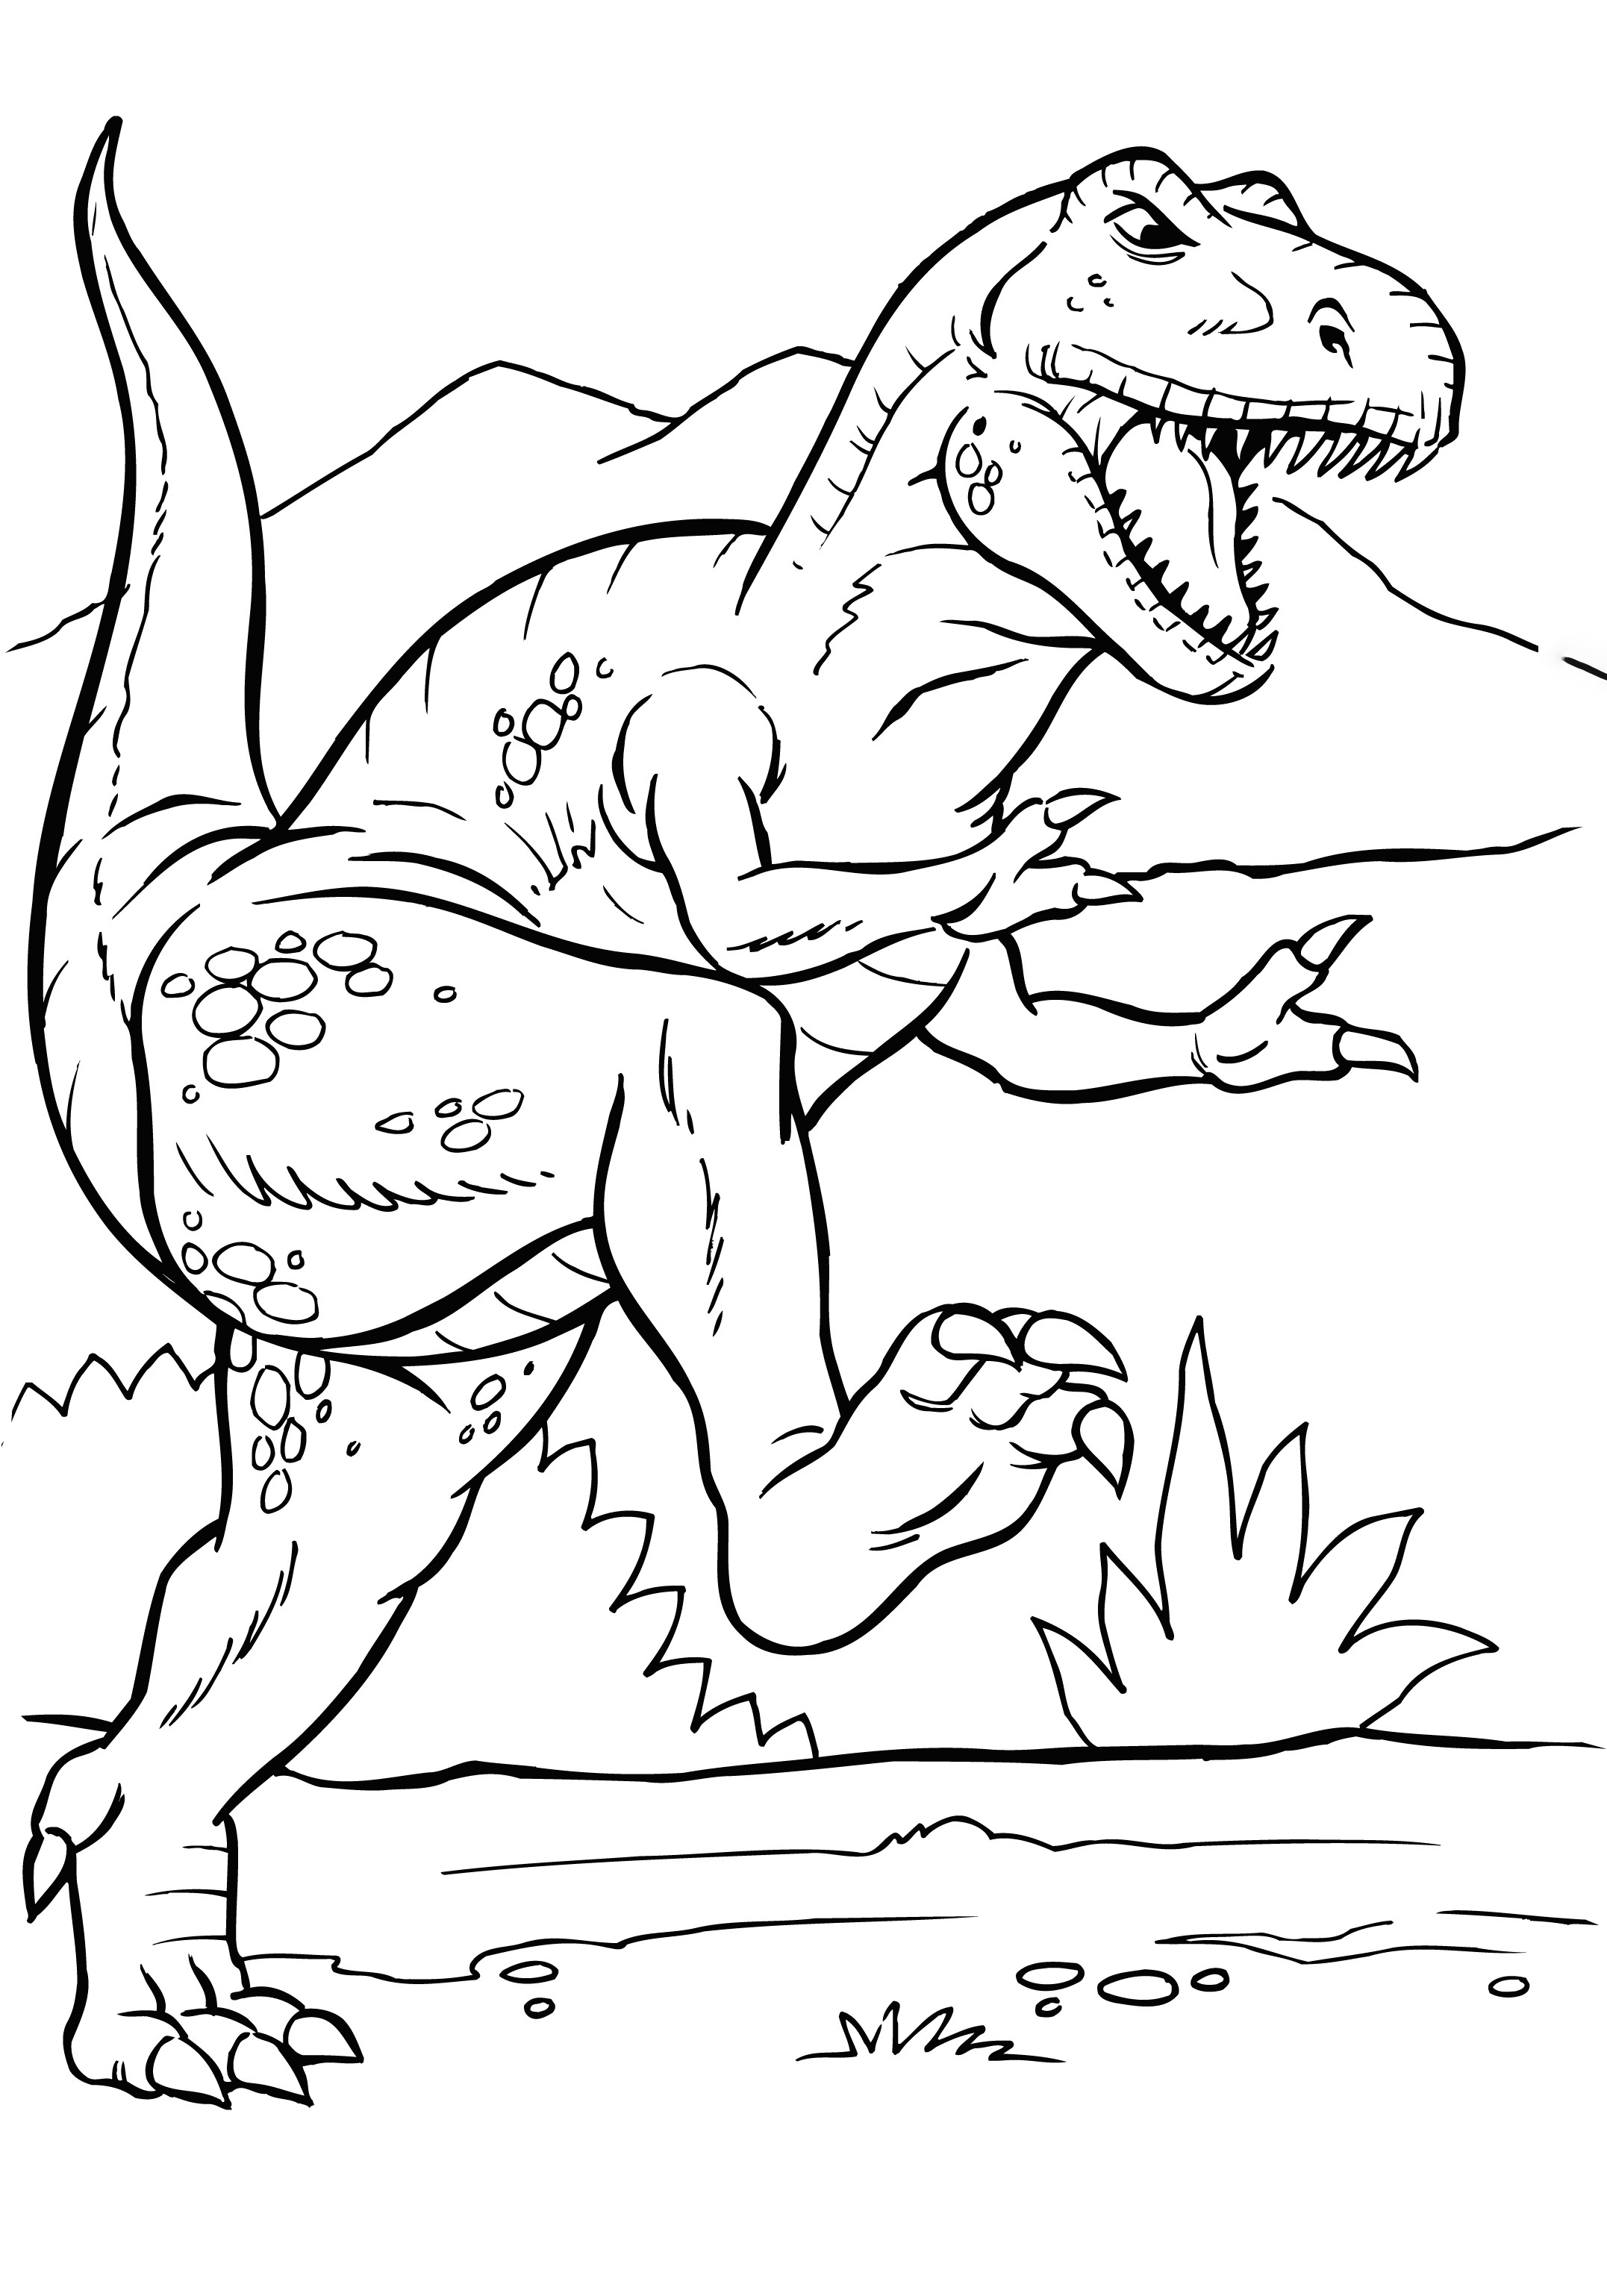 Smiling Allosaurus Coloring Page